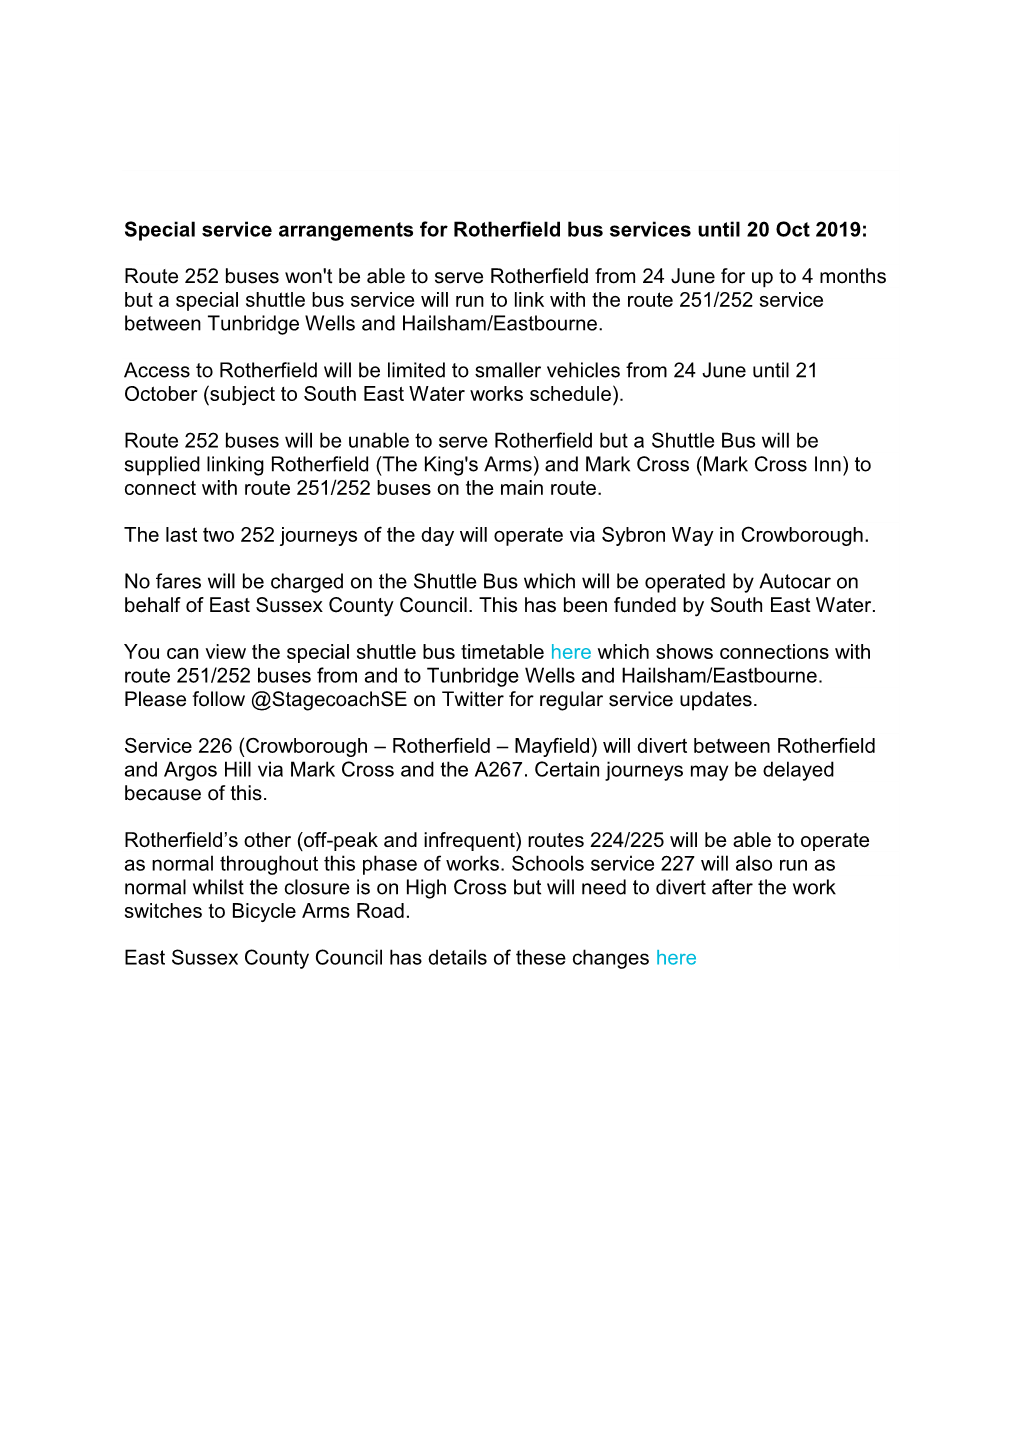 Special Service Arrangements for Rotherfield Bus Services Until 20 Oct 2019